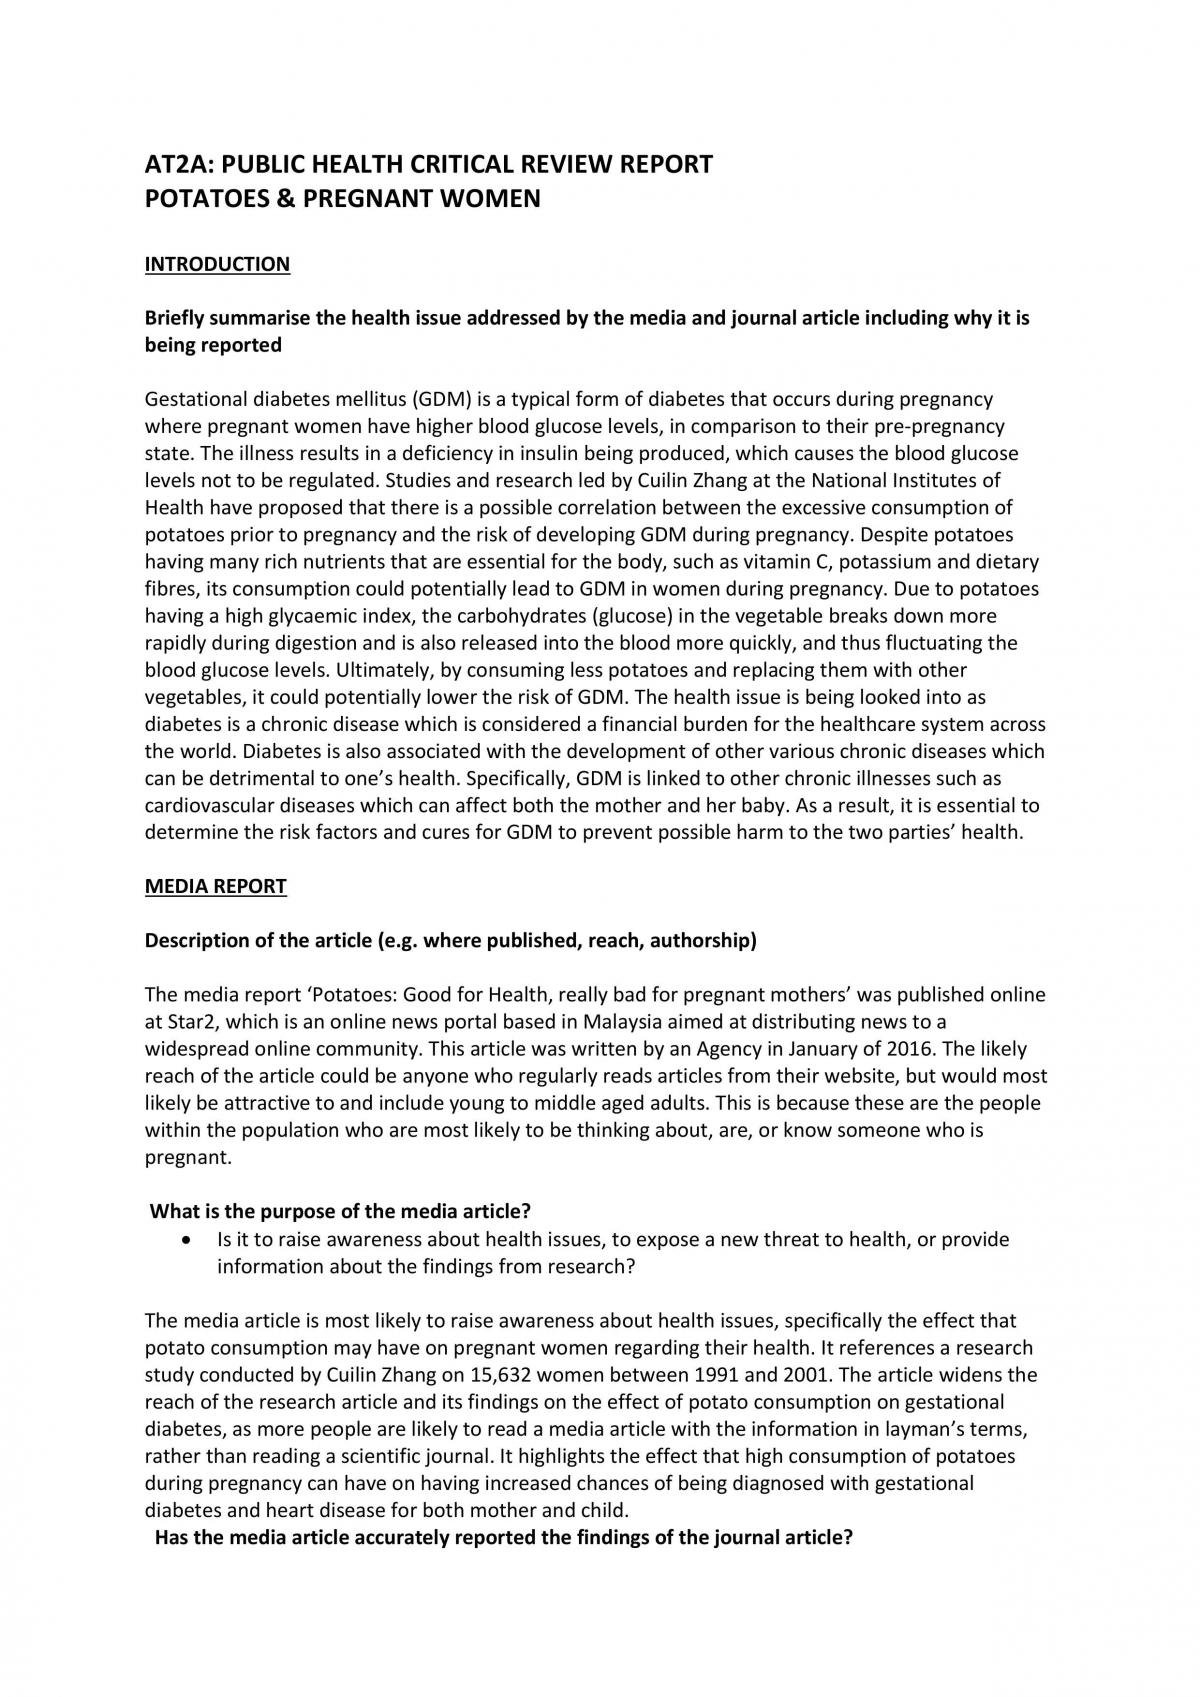 ATS2A Public Health Critical Review Report - Page 1